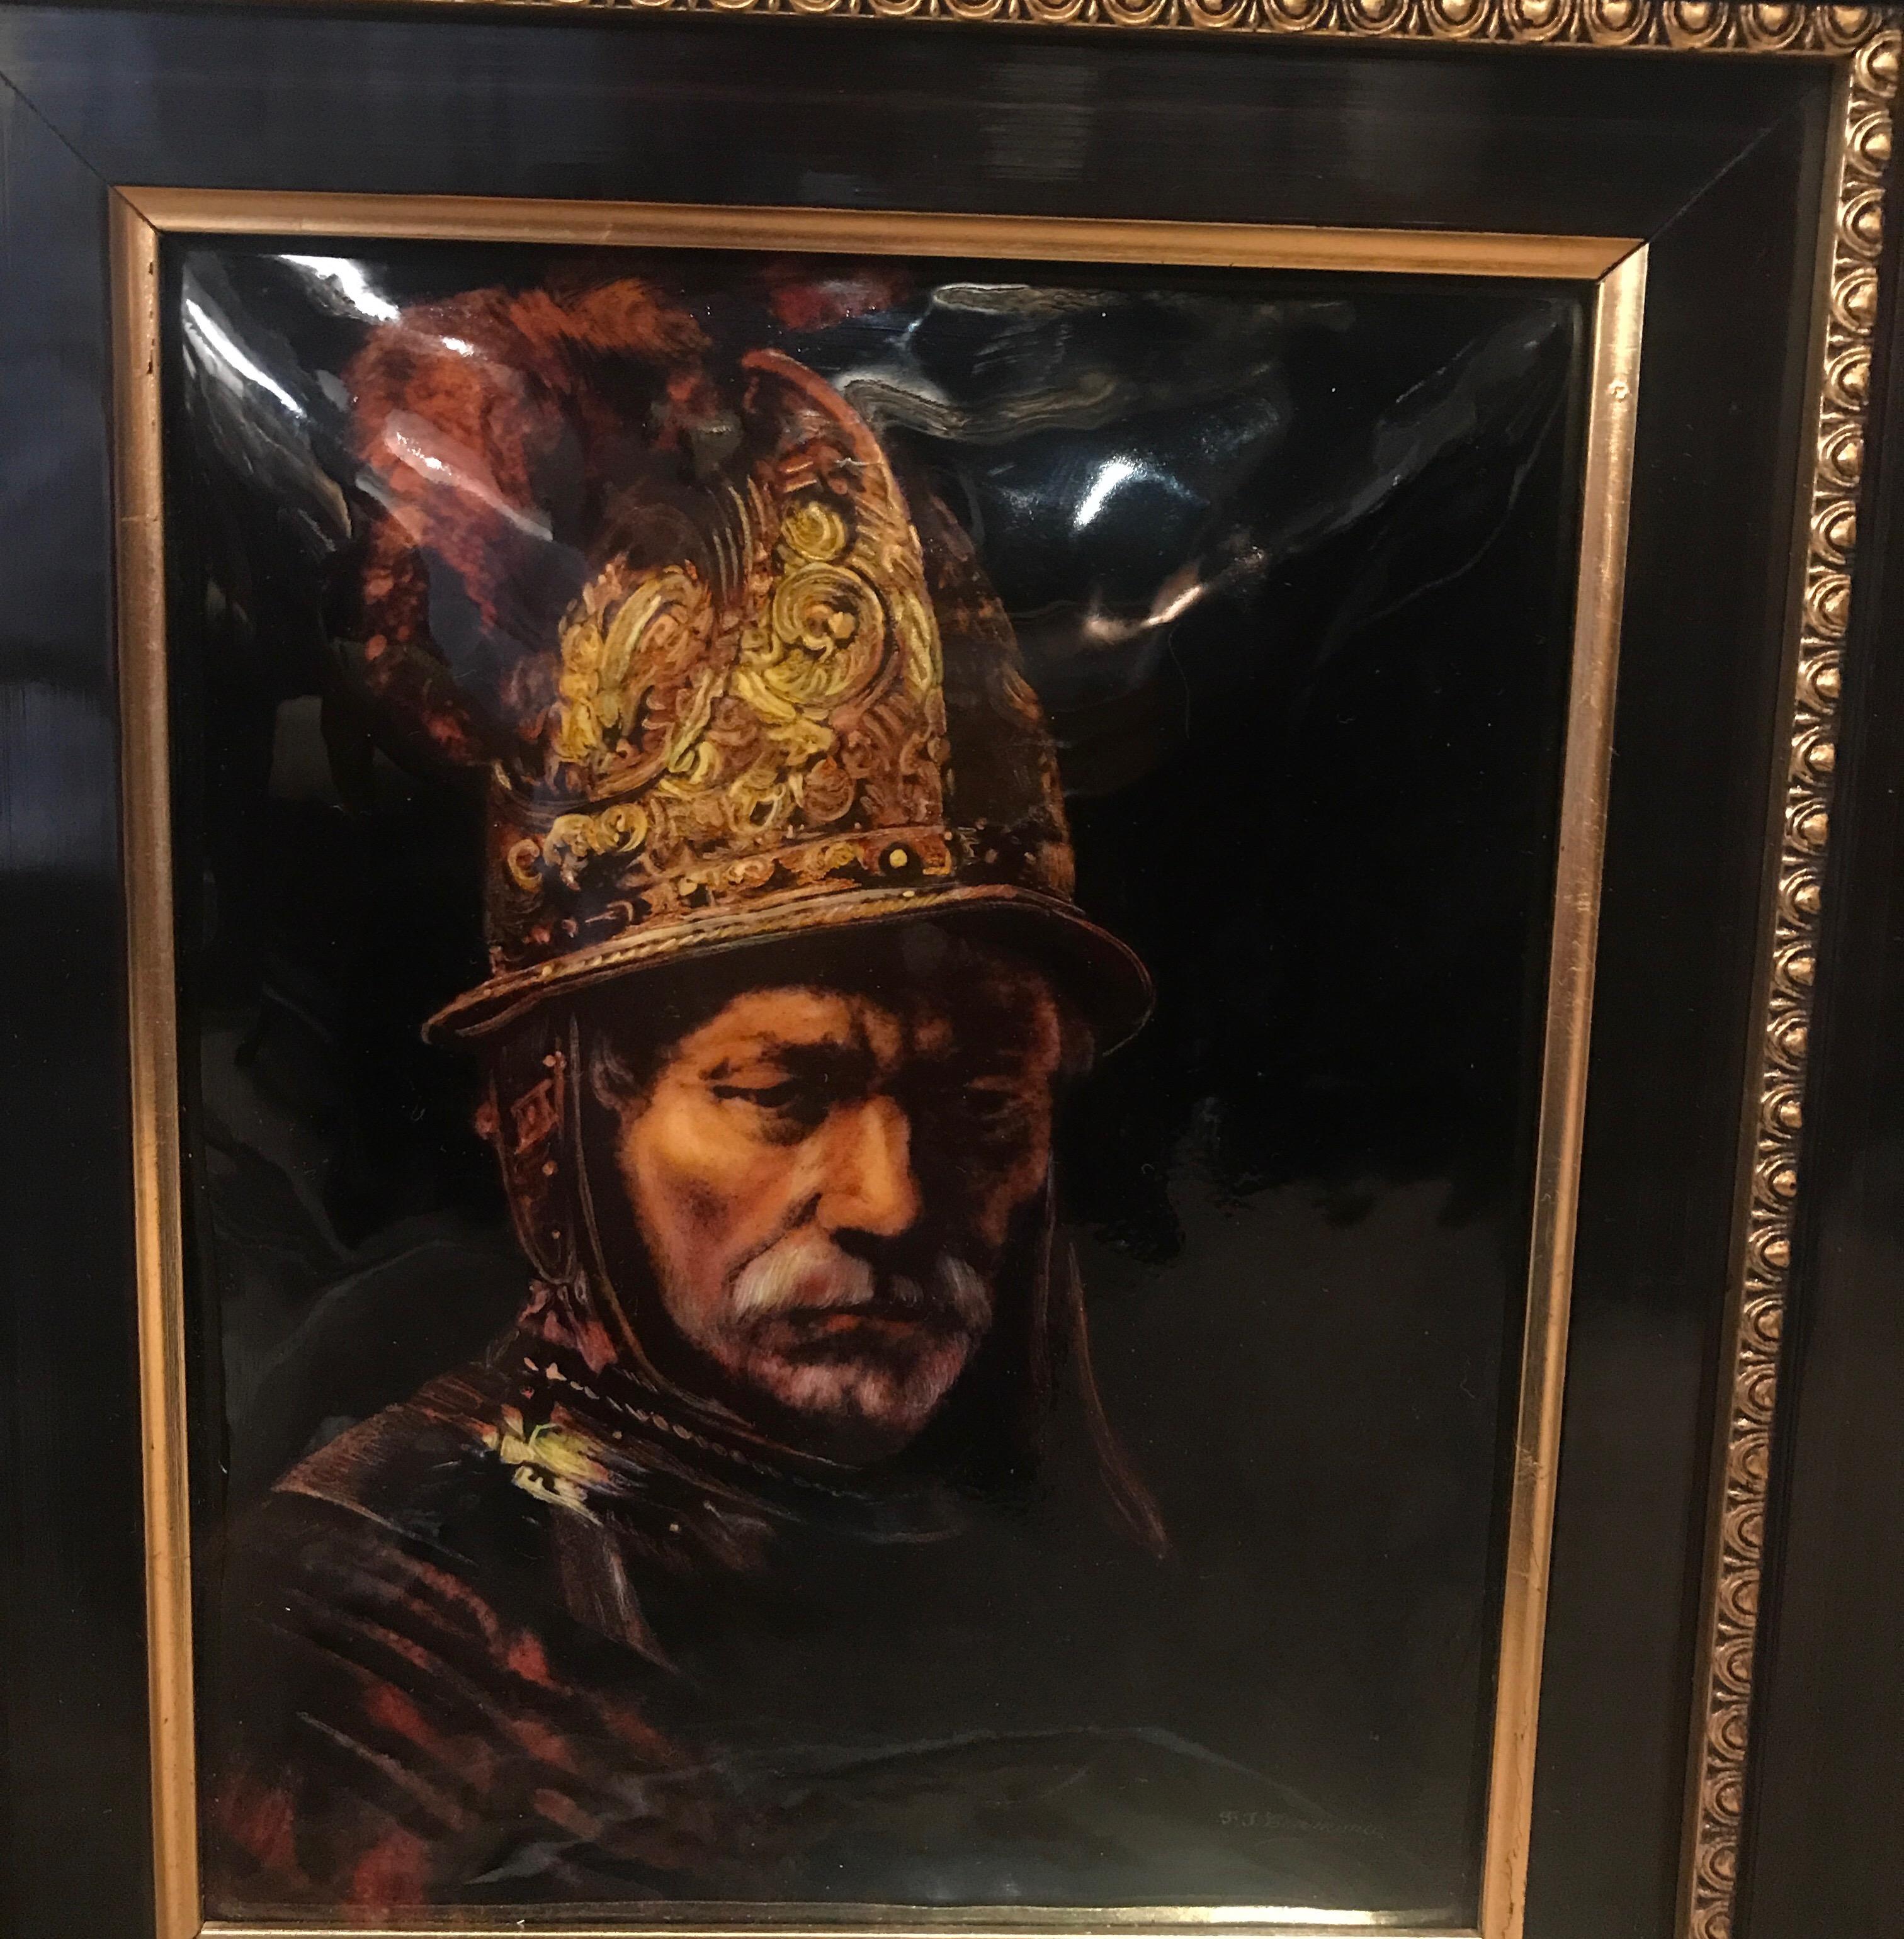 A hand painted Limoges enamel portrait of a conquistador. This French enamel portrait is on a curved copper plate with a rosewood and ebonized frame. Signed in the lover right corner F.J. Carmona. The enamel is in perfect condition and the original